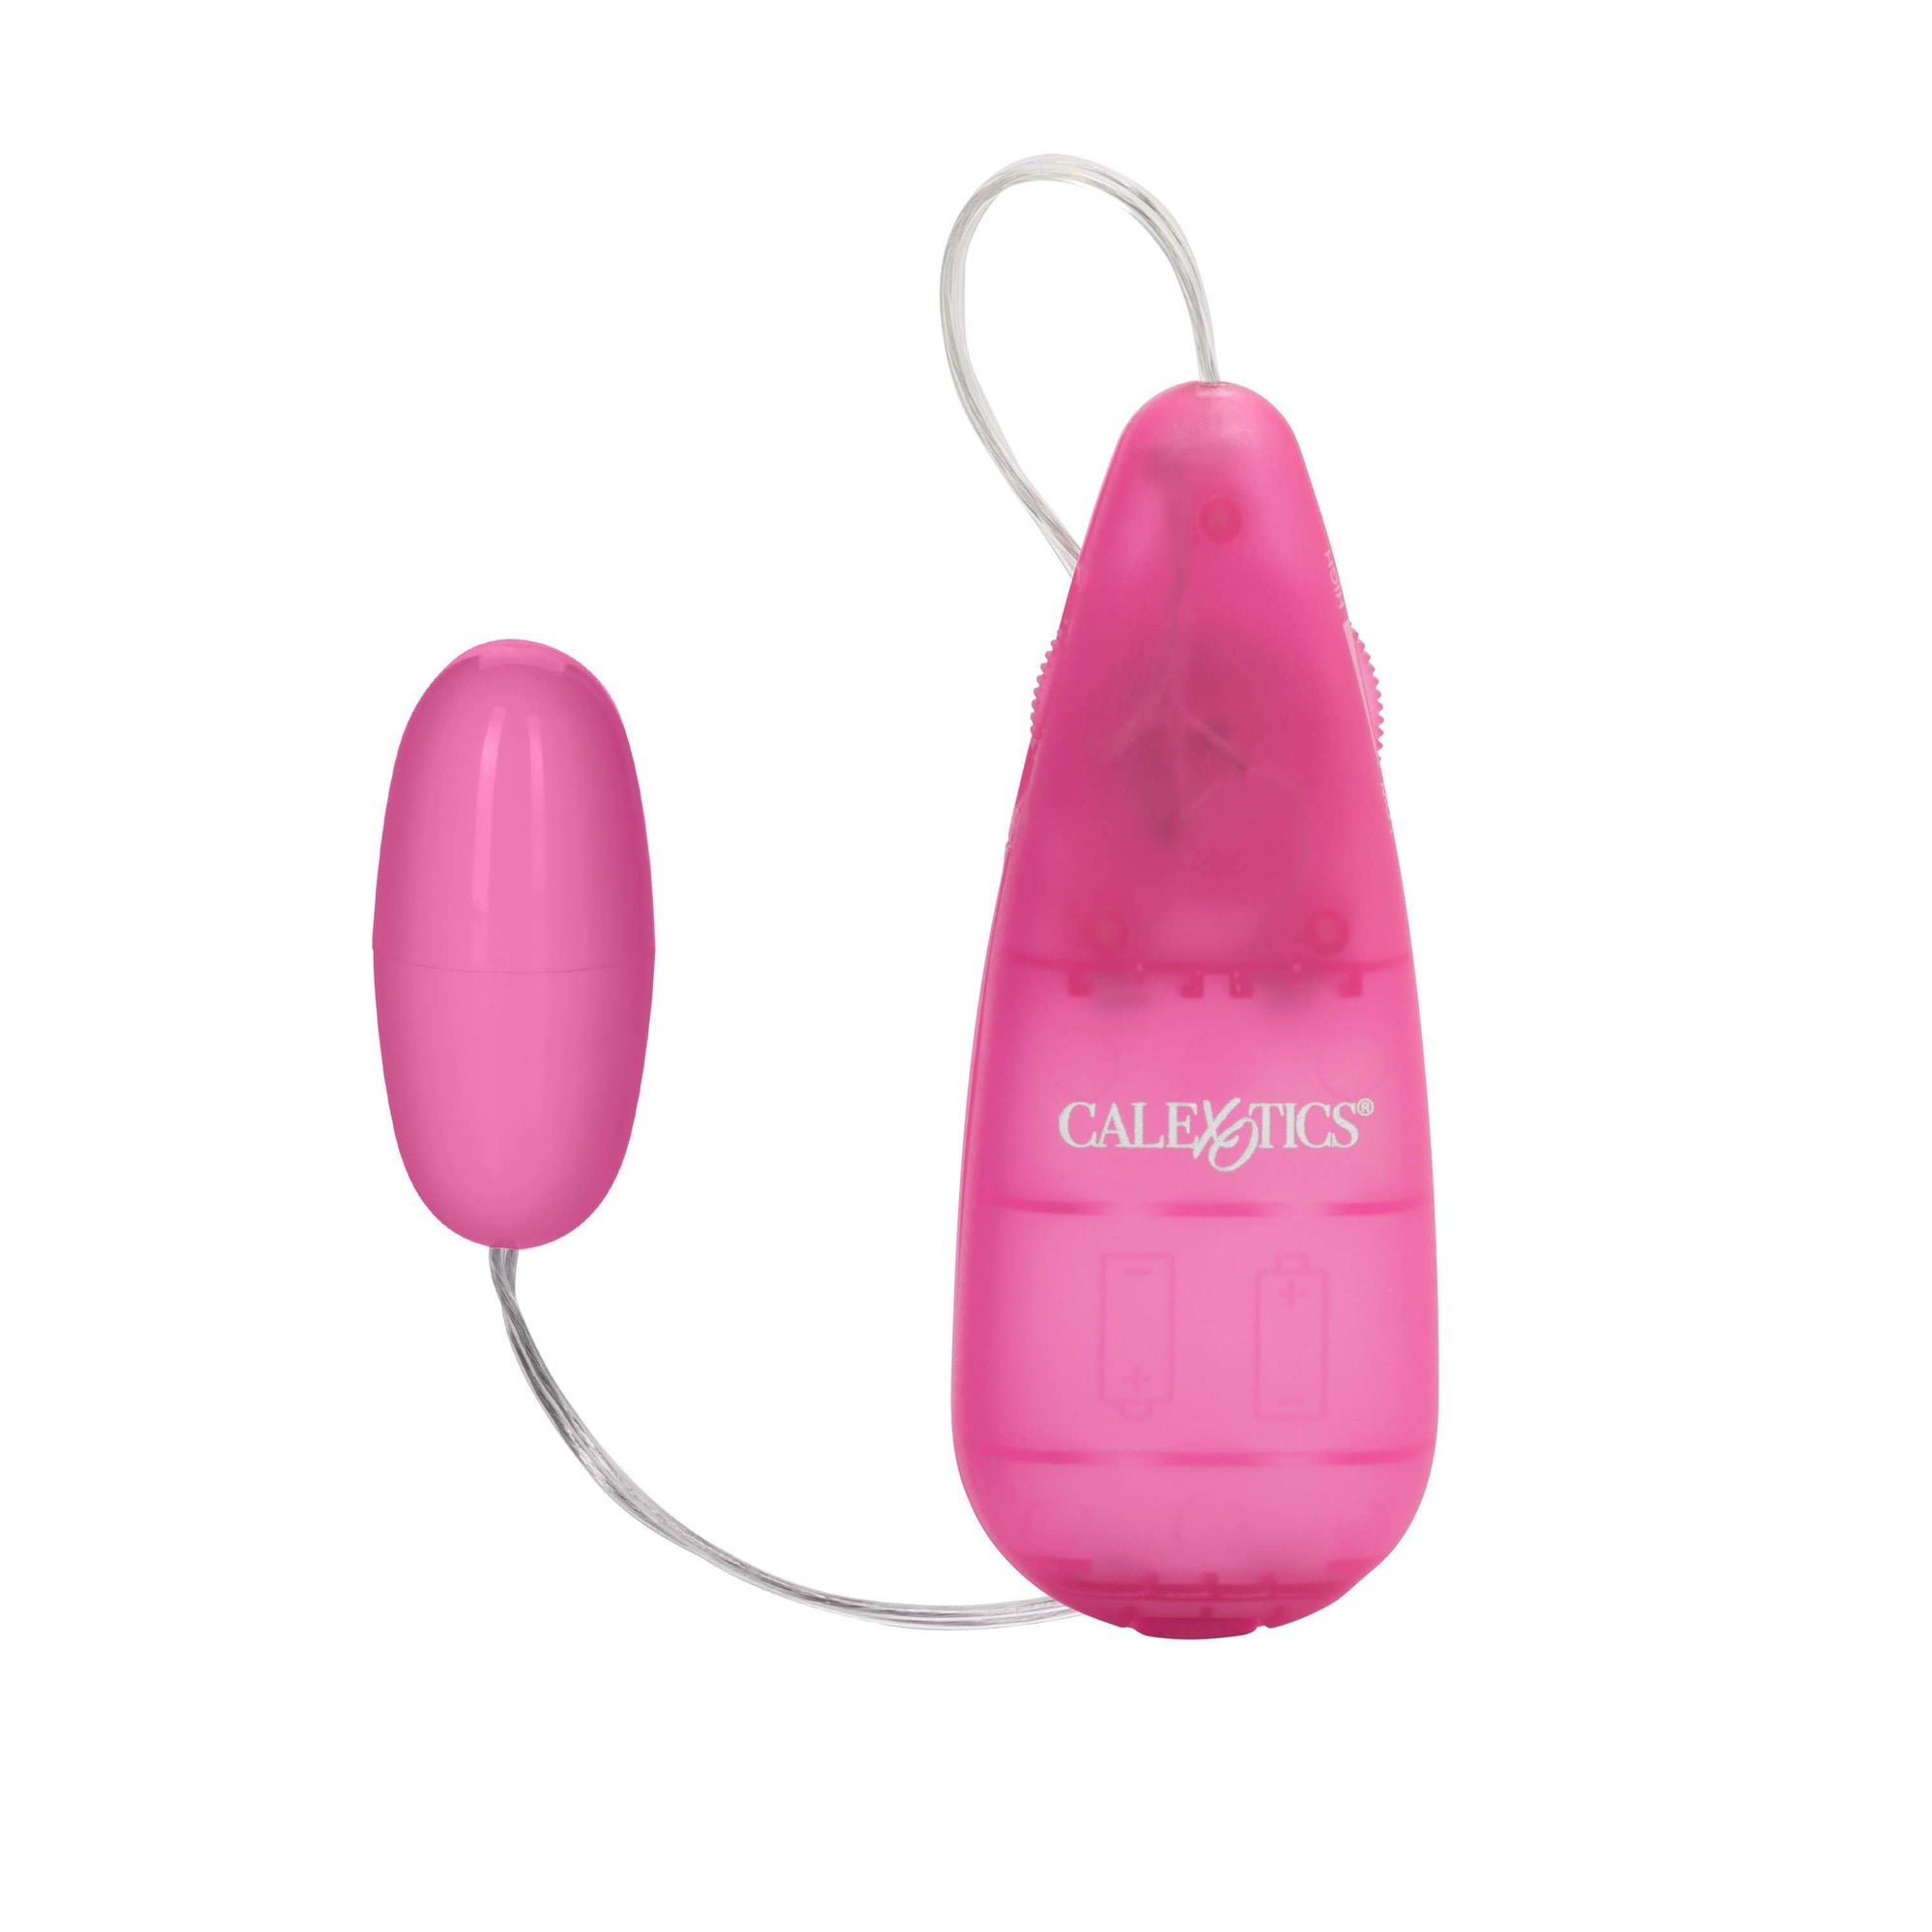 California Exotics - Pocket Exotics Vibrating Pink Passion Bullet Vibrator (Pink) Wired Remote Control Egg (Vibration) Non Rechargeable 716770003980 CherryAffairs